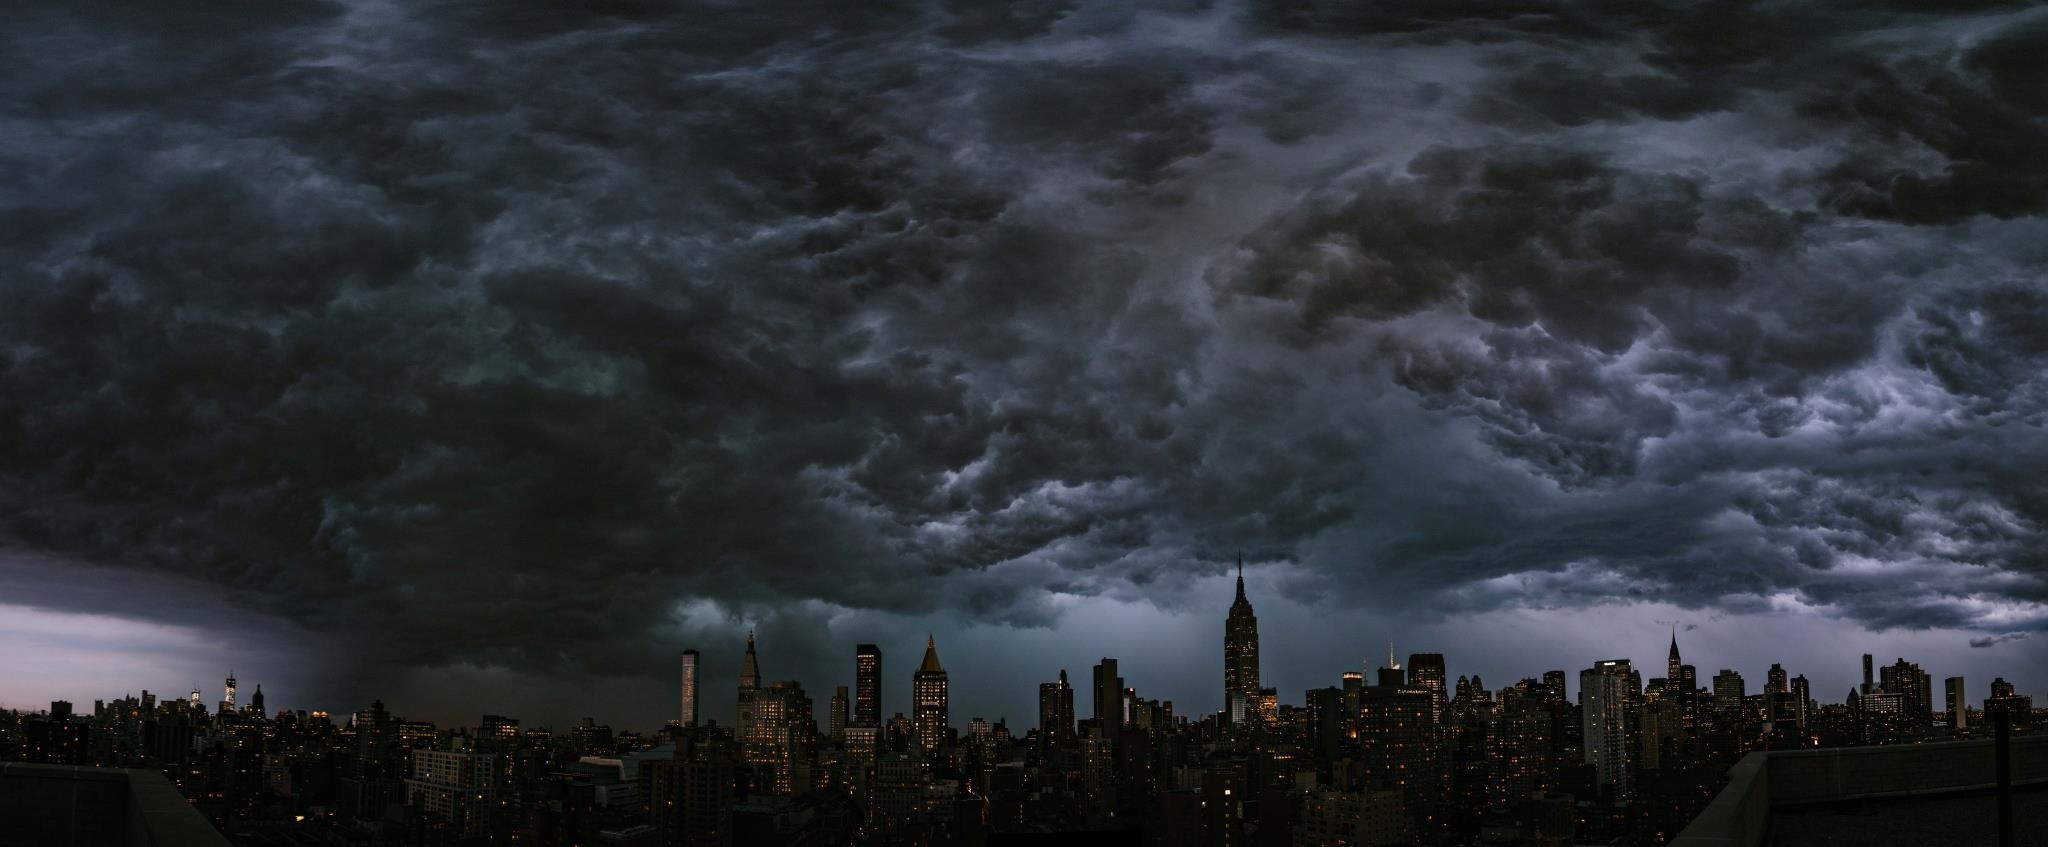 Awesome 42 Storm Wallpapers - Darkness Cover The Earth - HD Wallpaper 